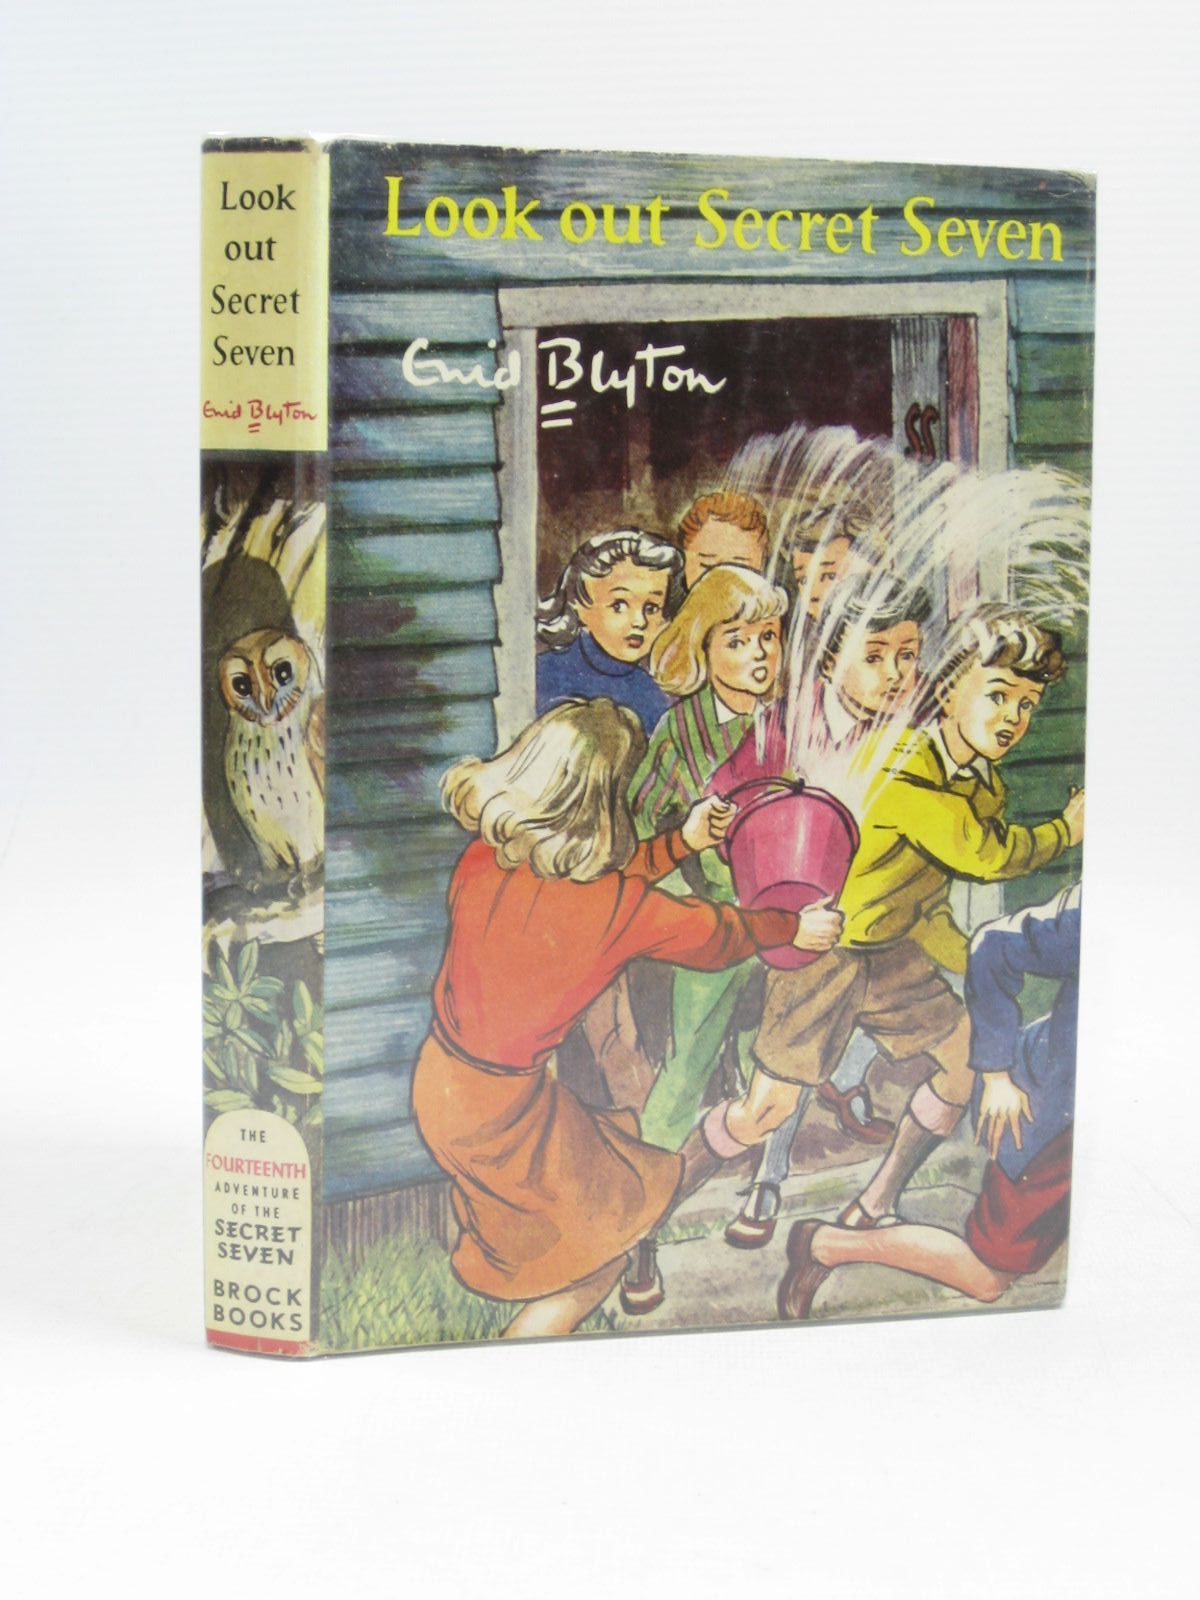 Cover of LOOK OUT SECRET SEVEN by Enid Blyton